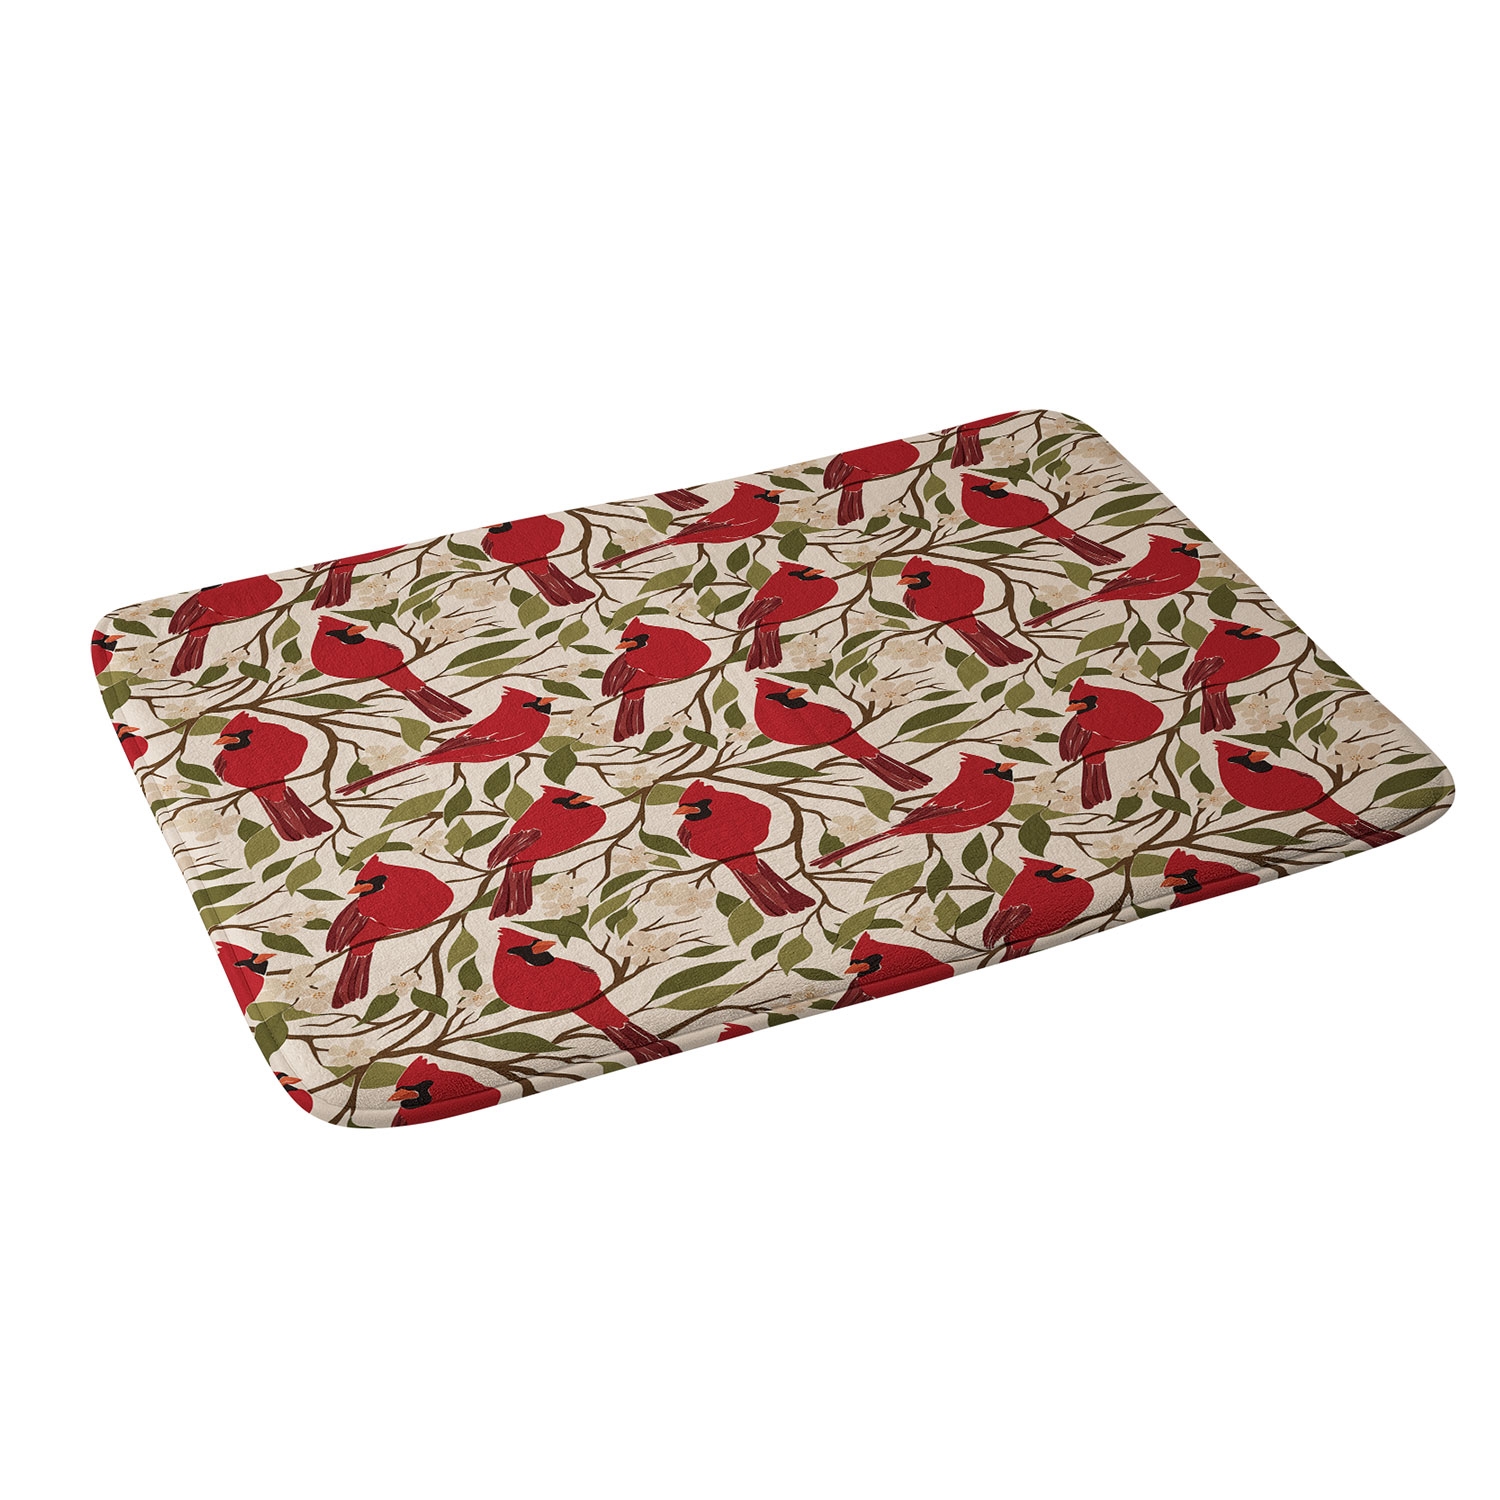 Cardinals On Blossoming Tree by Cuss Yeah Designs - Memory Foam Bath Mat 21" x 34" - Image 1